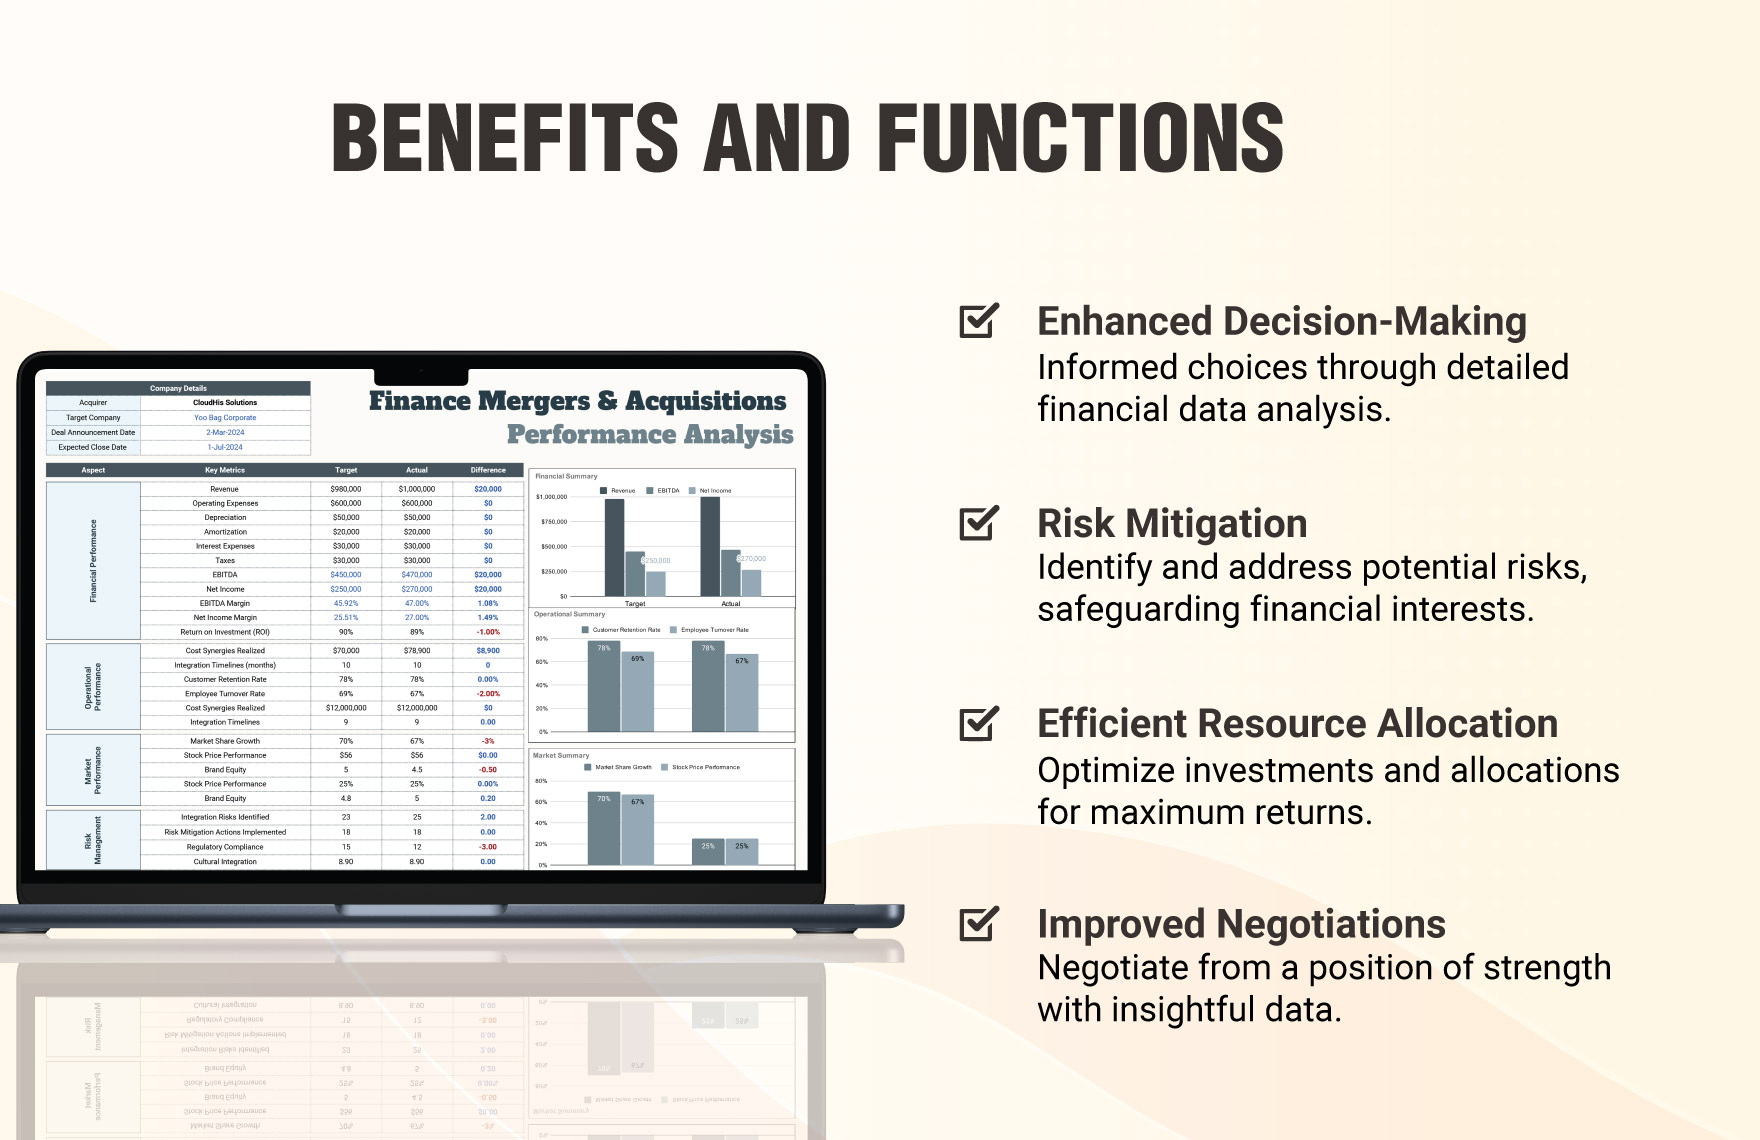 Finance Mergers & Acquisitions Performance Analysis Template